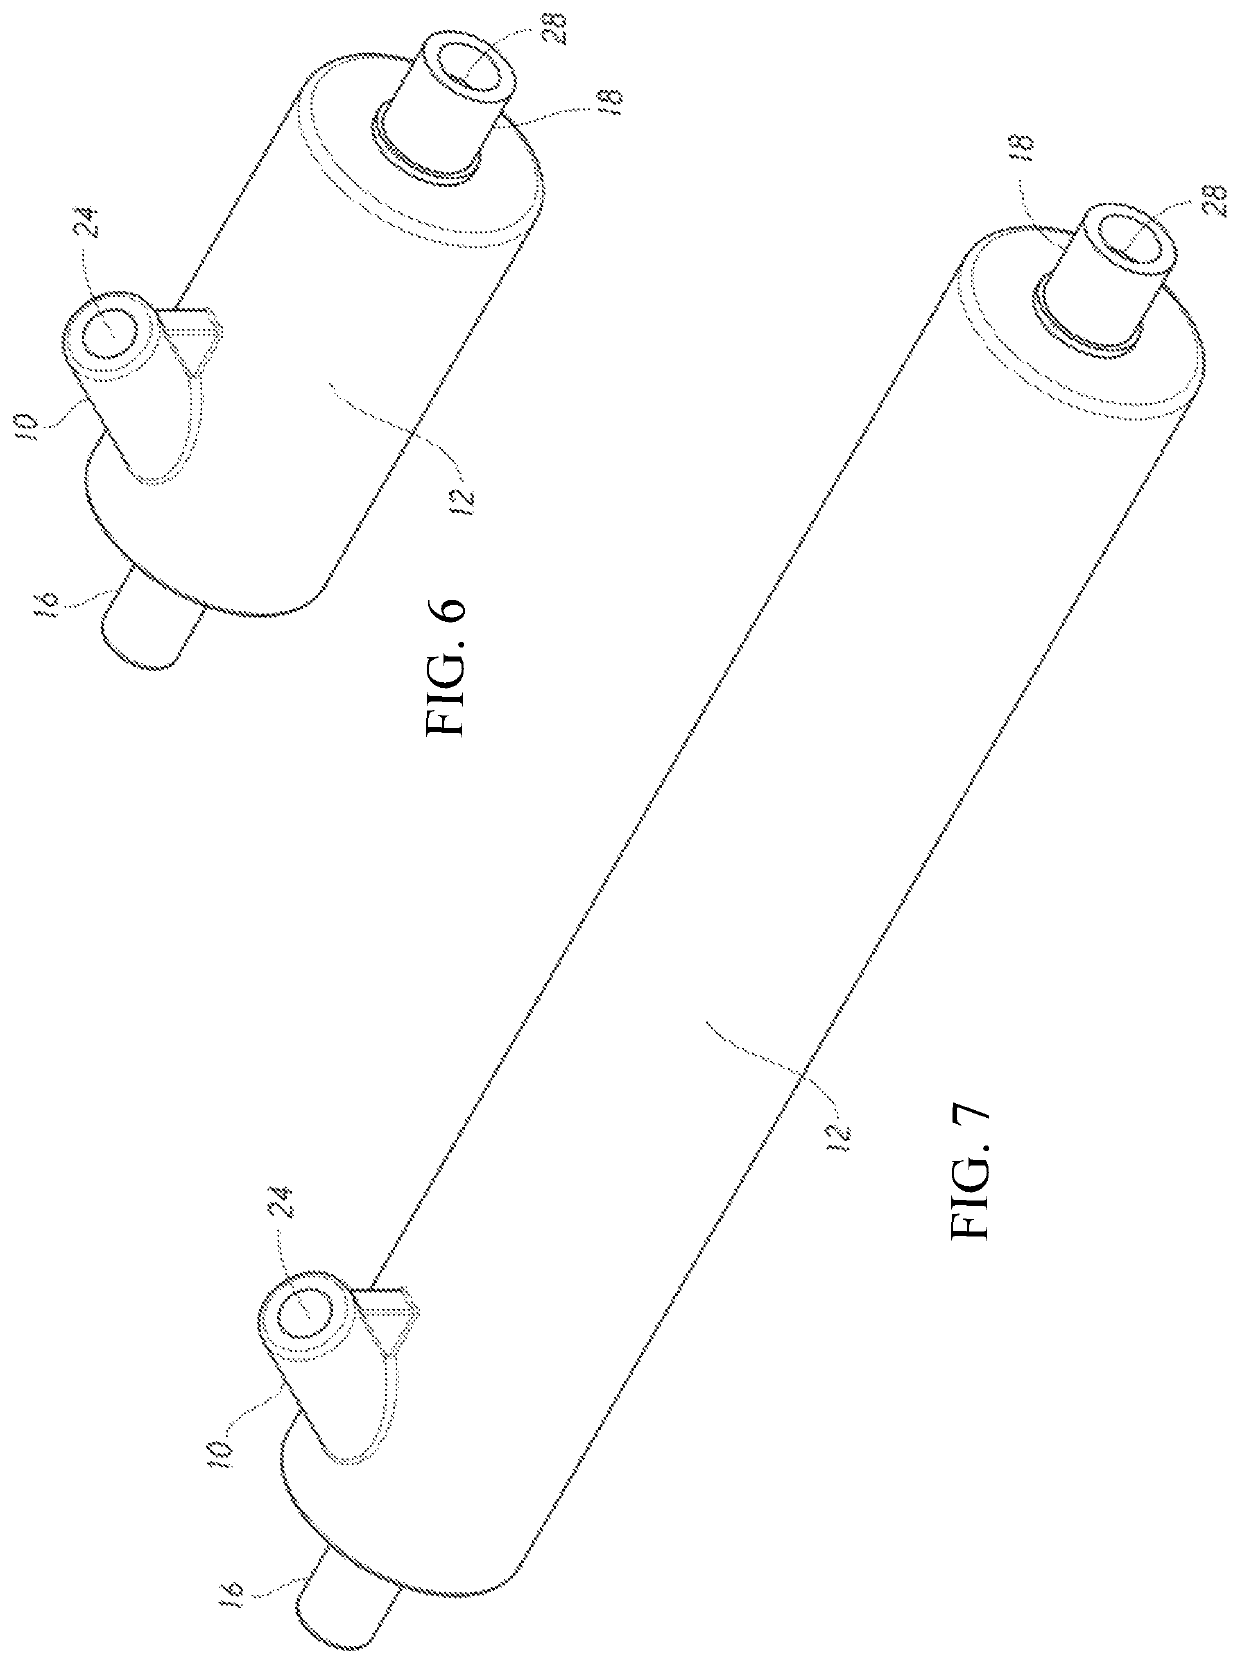 Gas removal apparatus and related methods